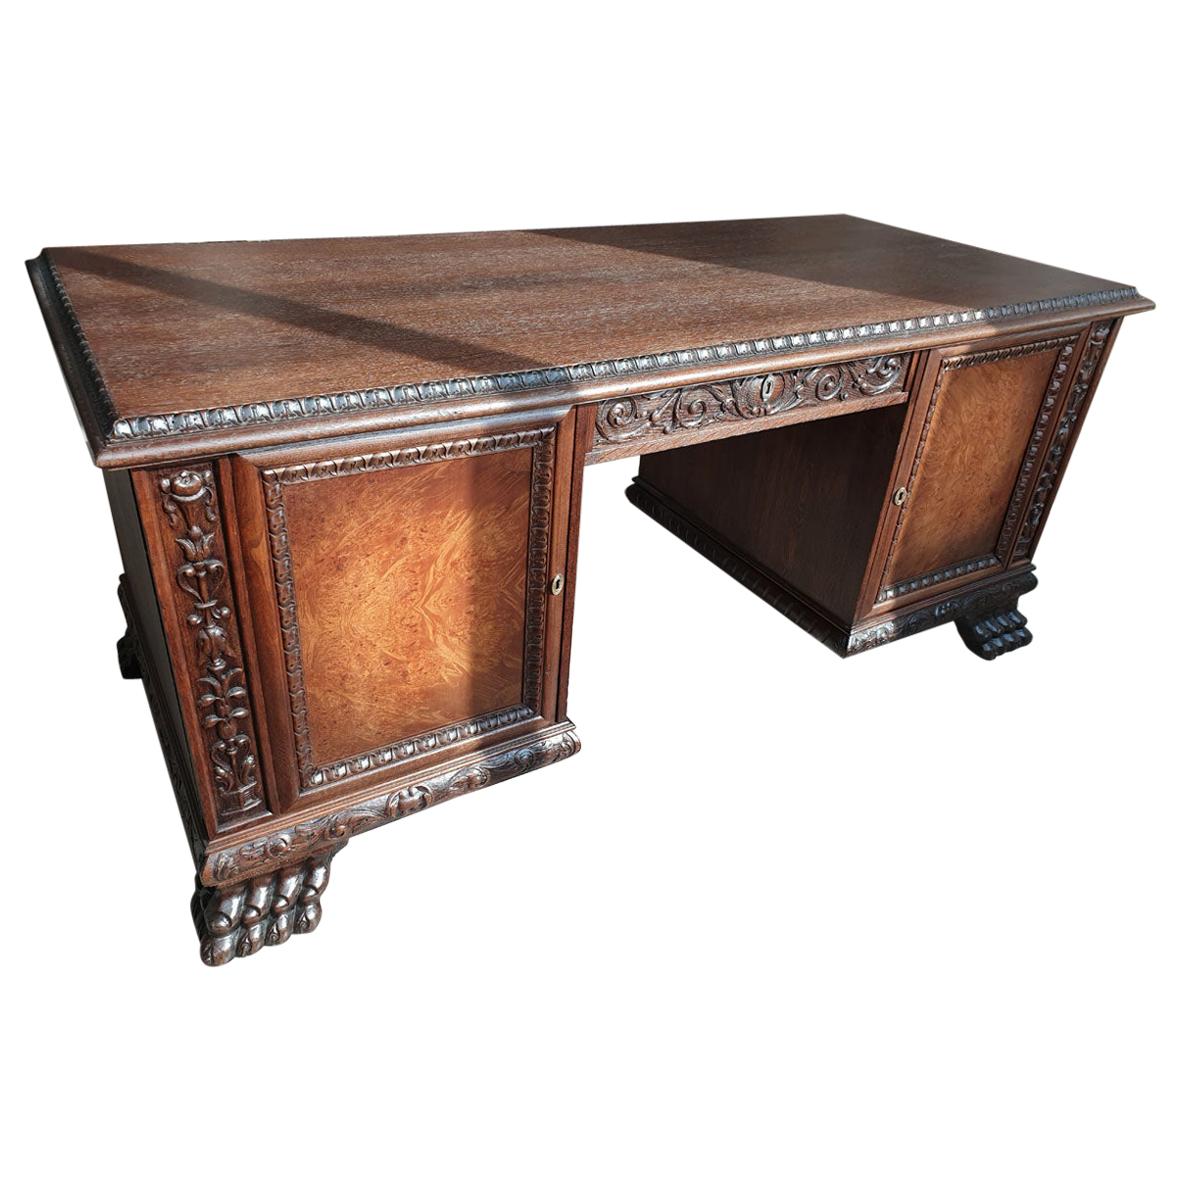 Renaissance Revival Style Solid Oak Desk with Walnut Burl, Early 20th Century